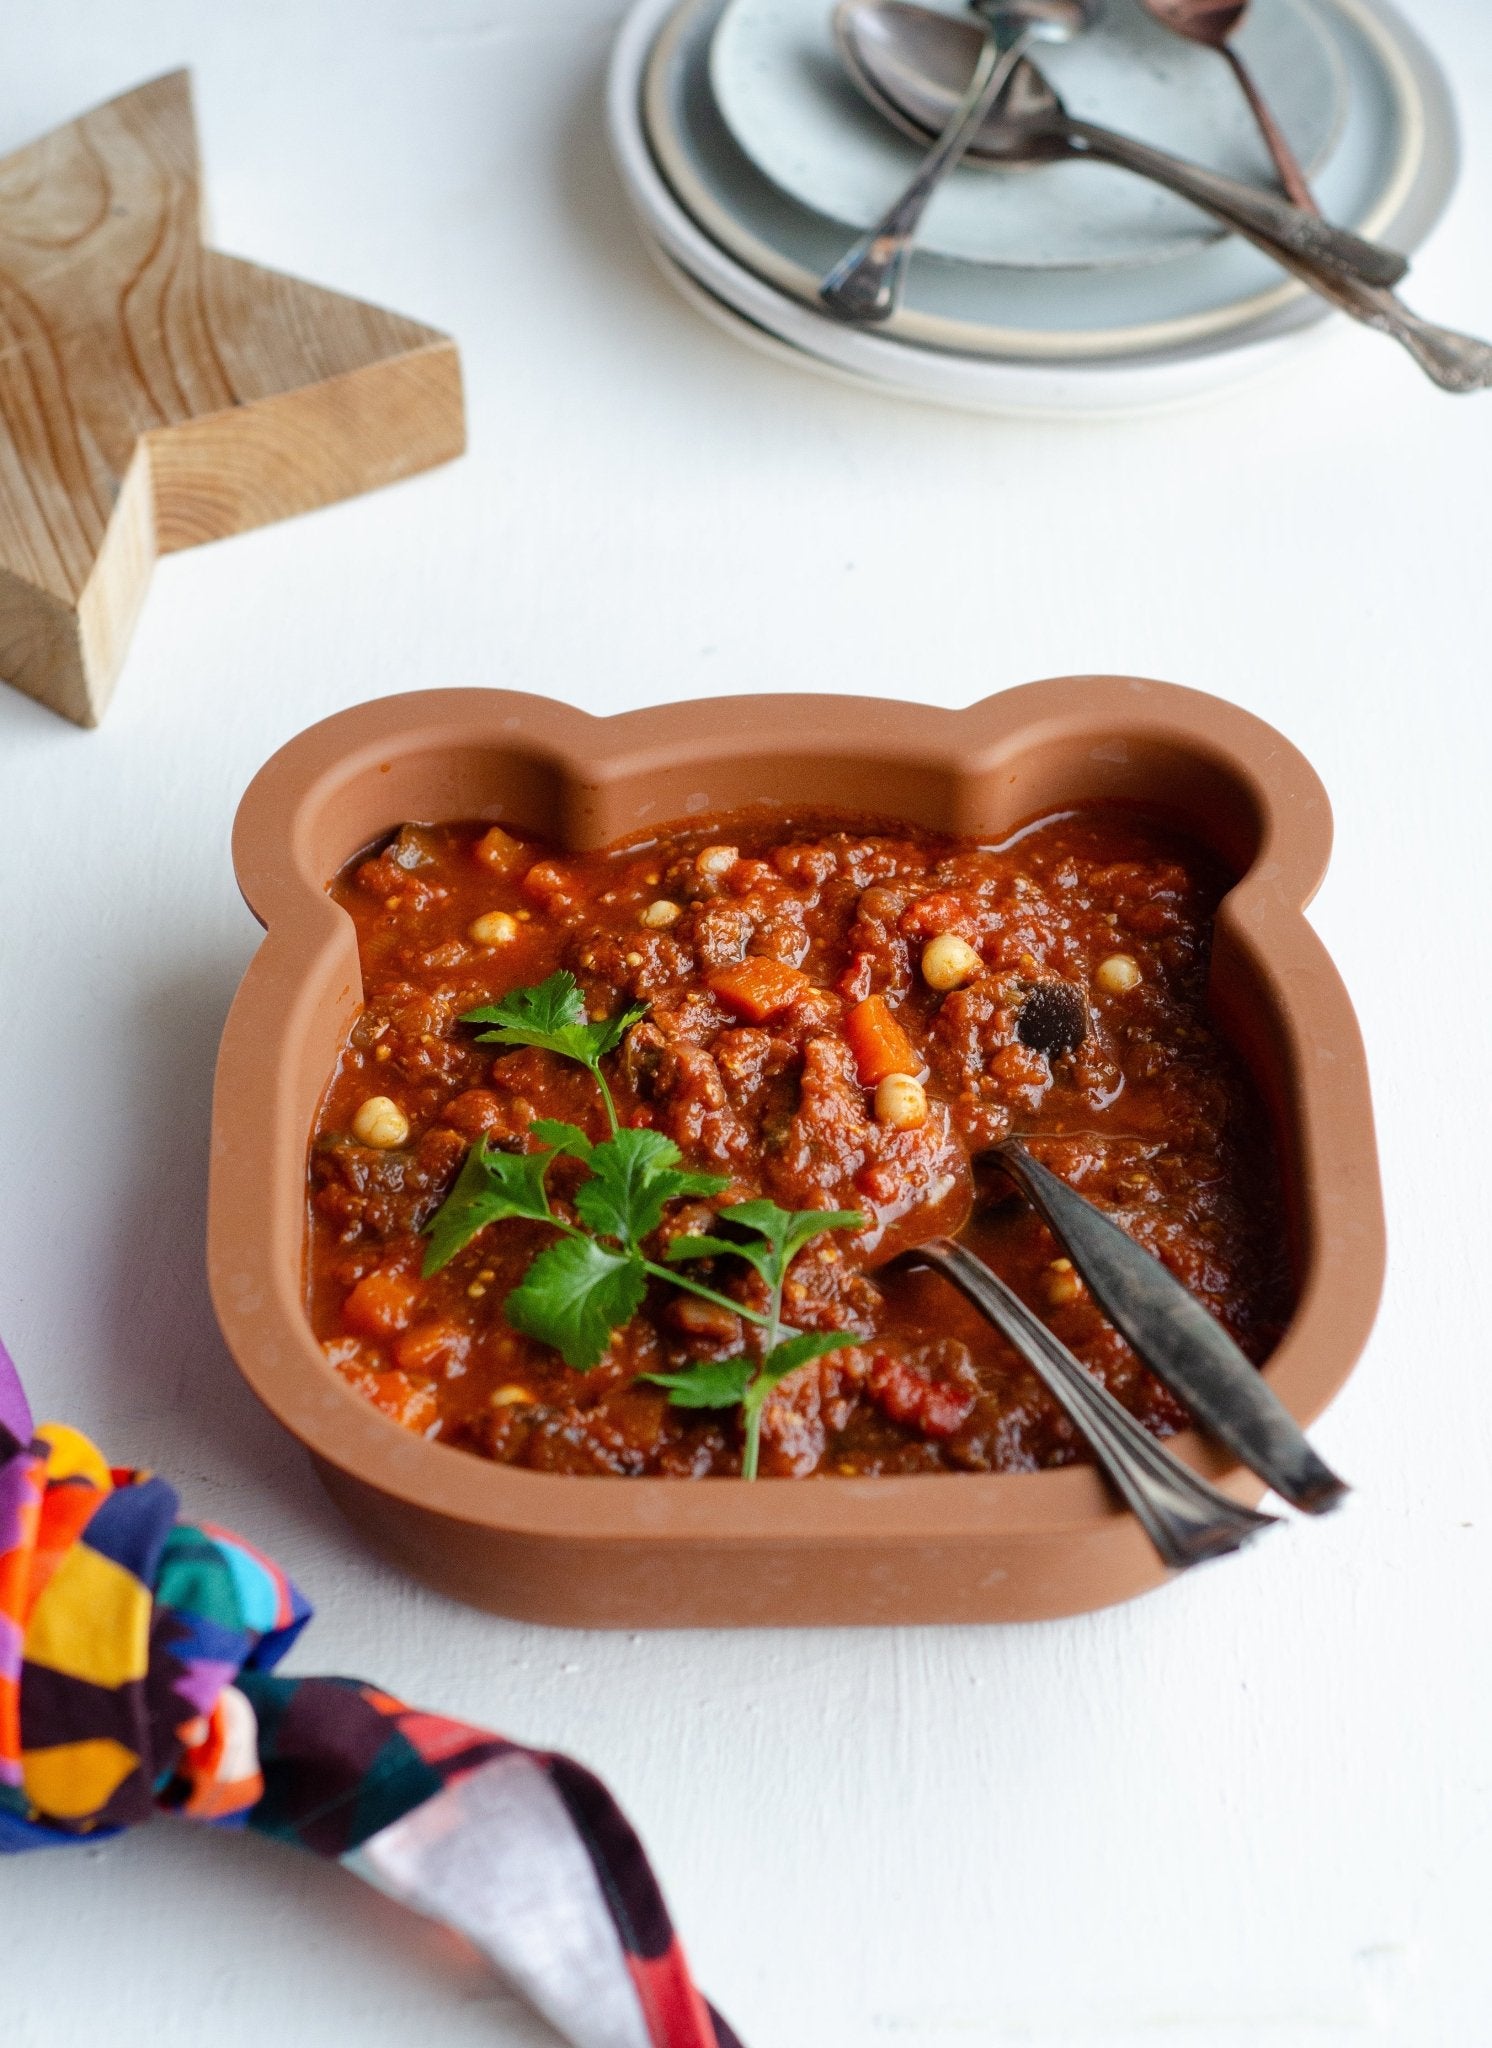 Moroccan Lamb and Chickpea Stew